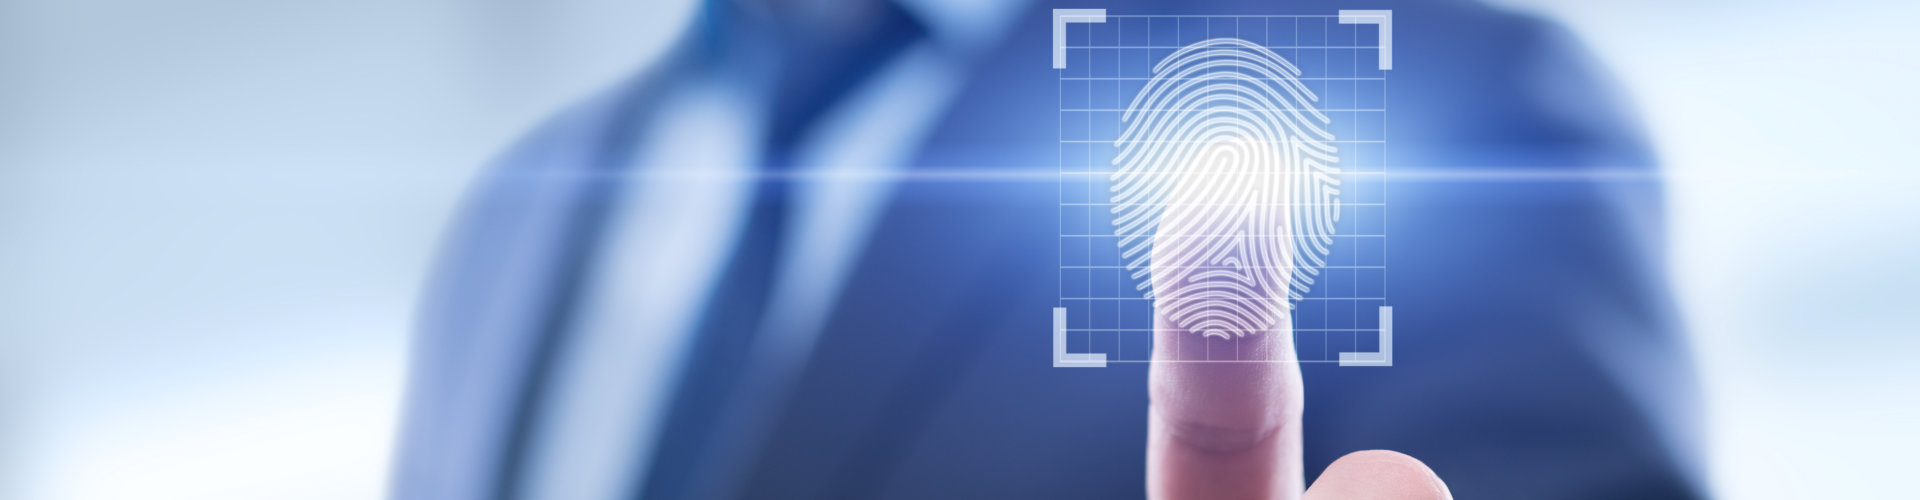 Fingerprint scan provides security access with biometrics identification